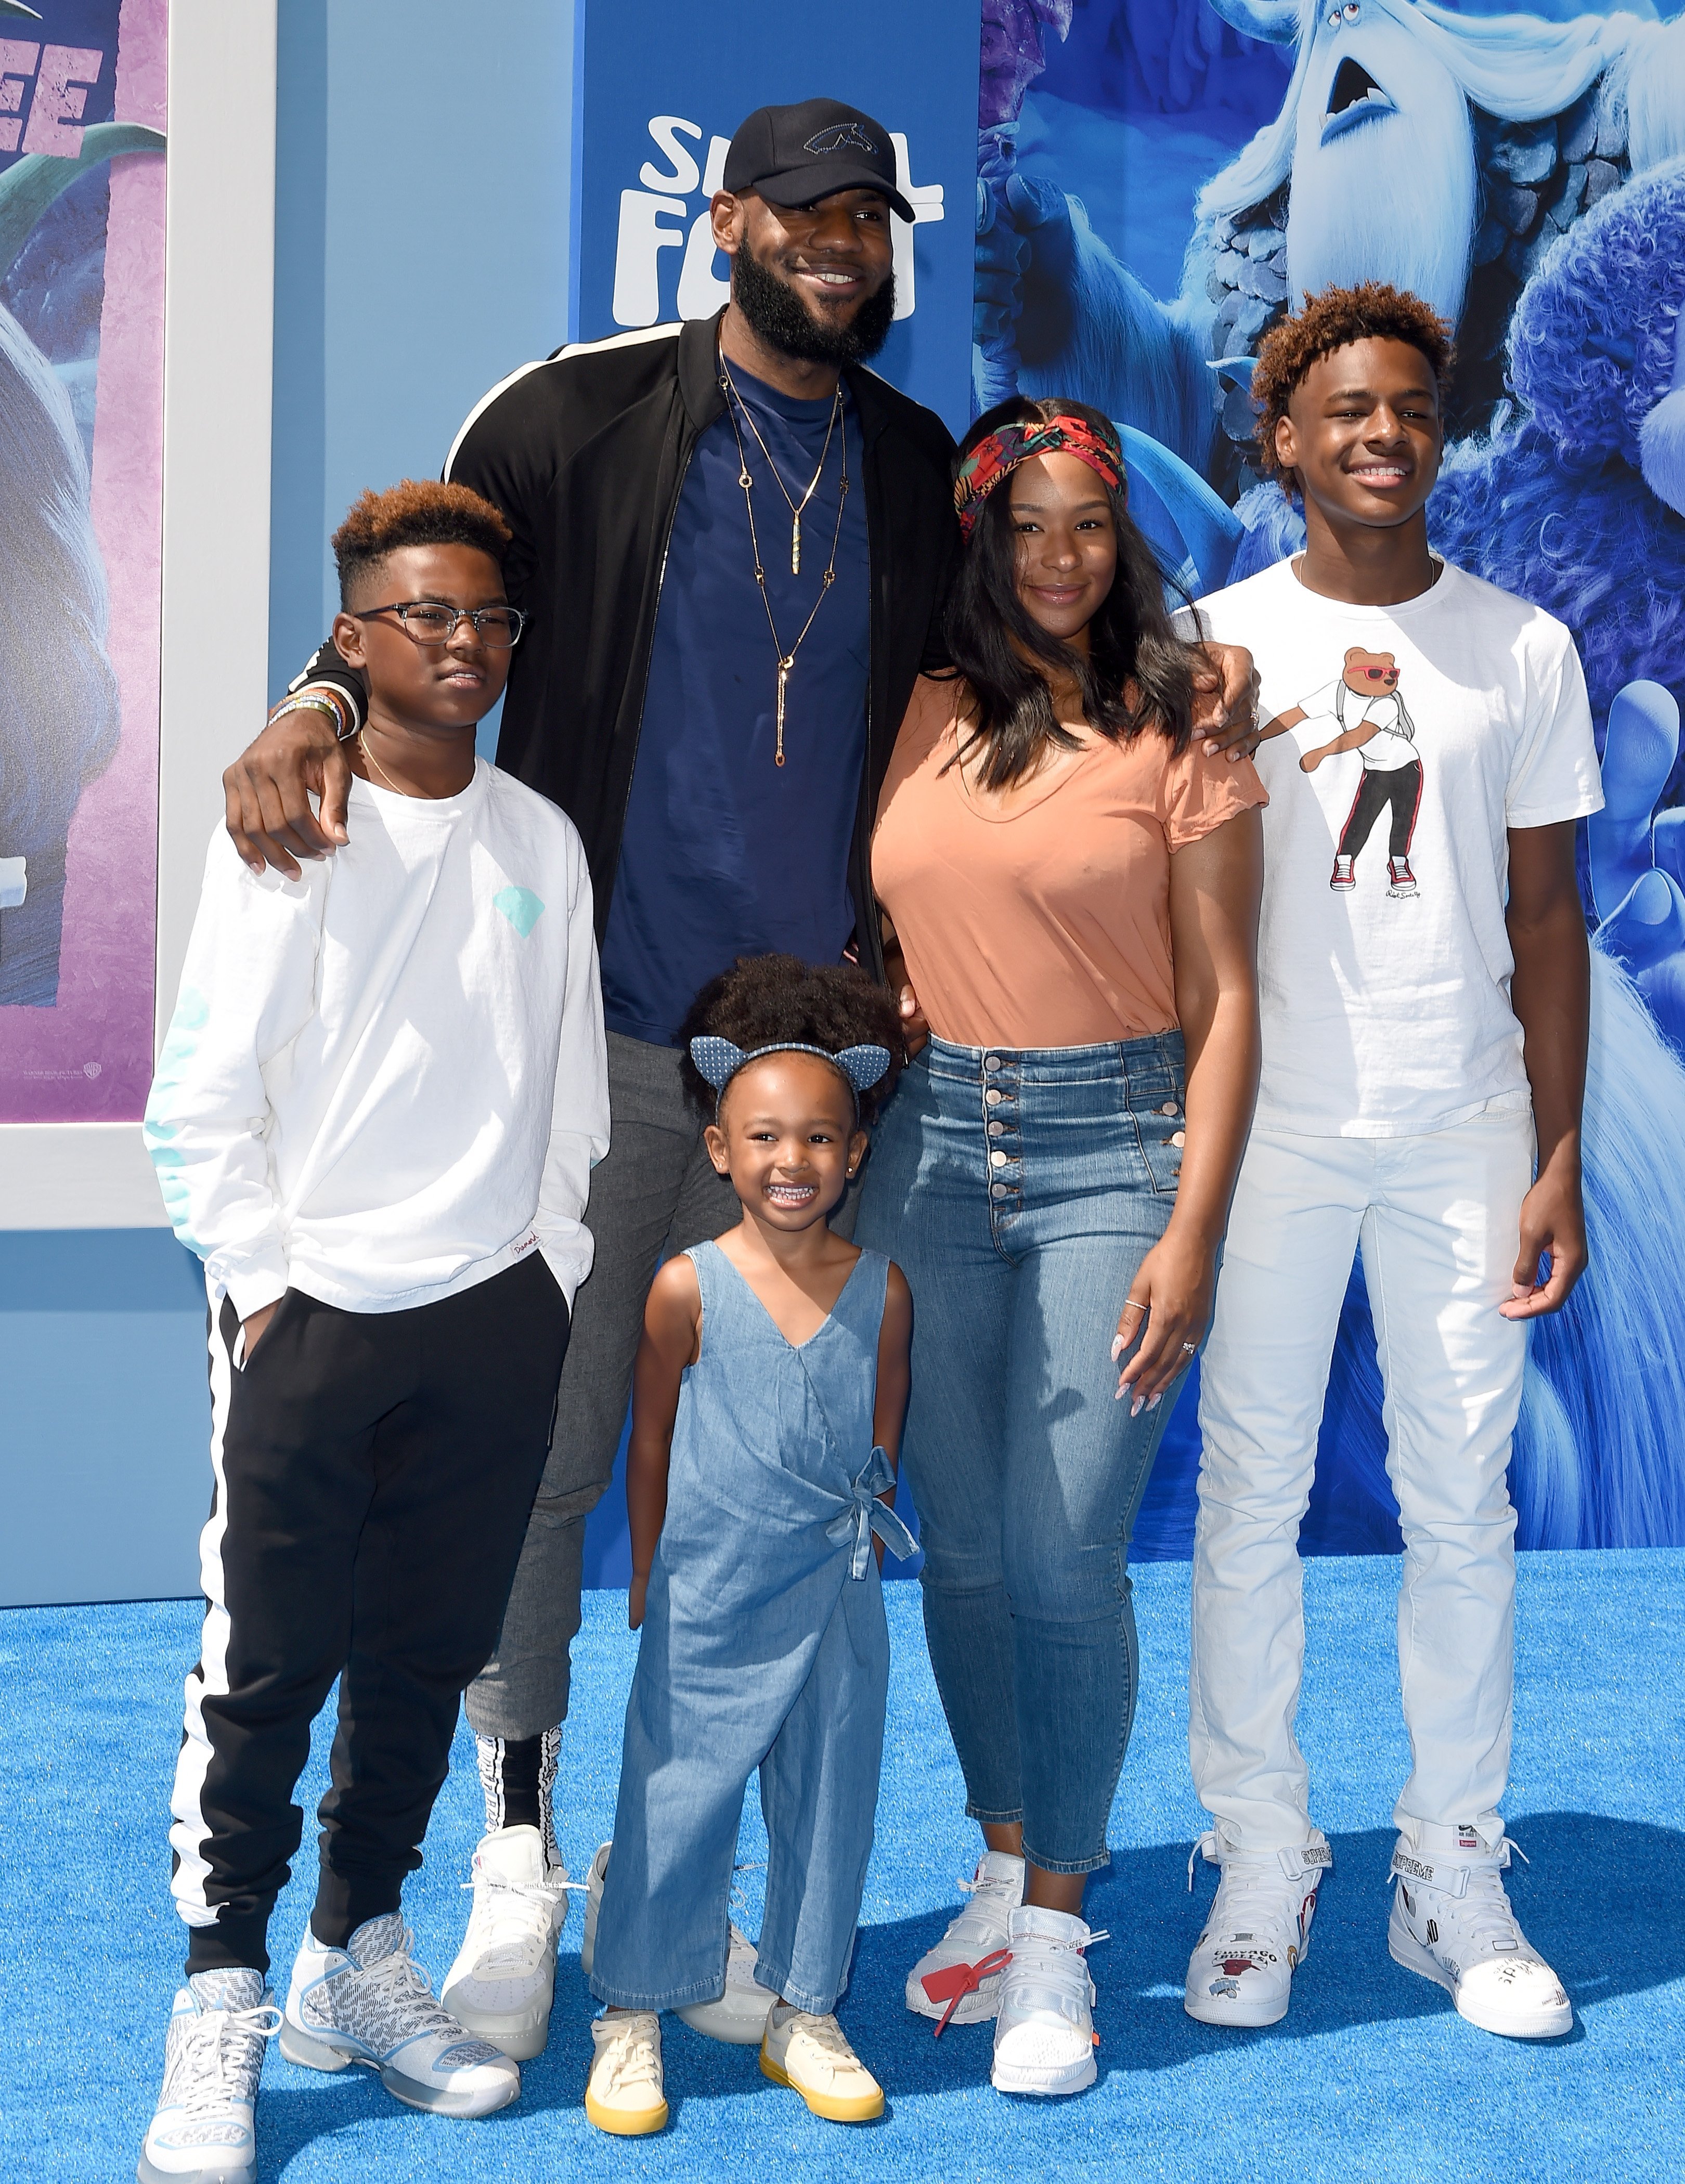  LeBron James, Savannah James, LeBron James Jr., Bryce Maximus James and Zhuri James attend the premiere of Warner Bros. Pictures' 'Smallfoot' at Regency Village Theatre | Photo: Getty Image